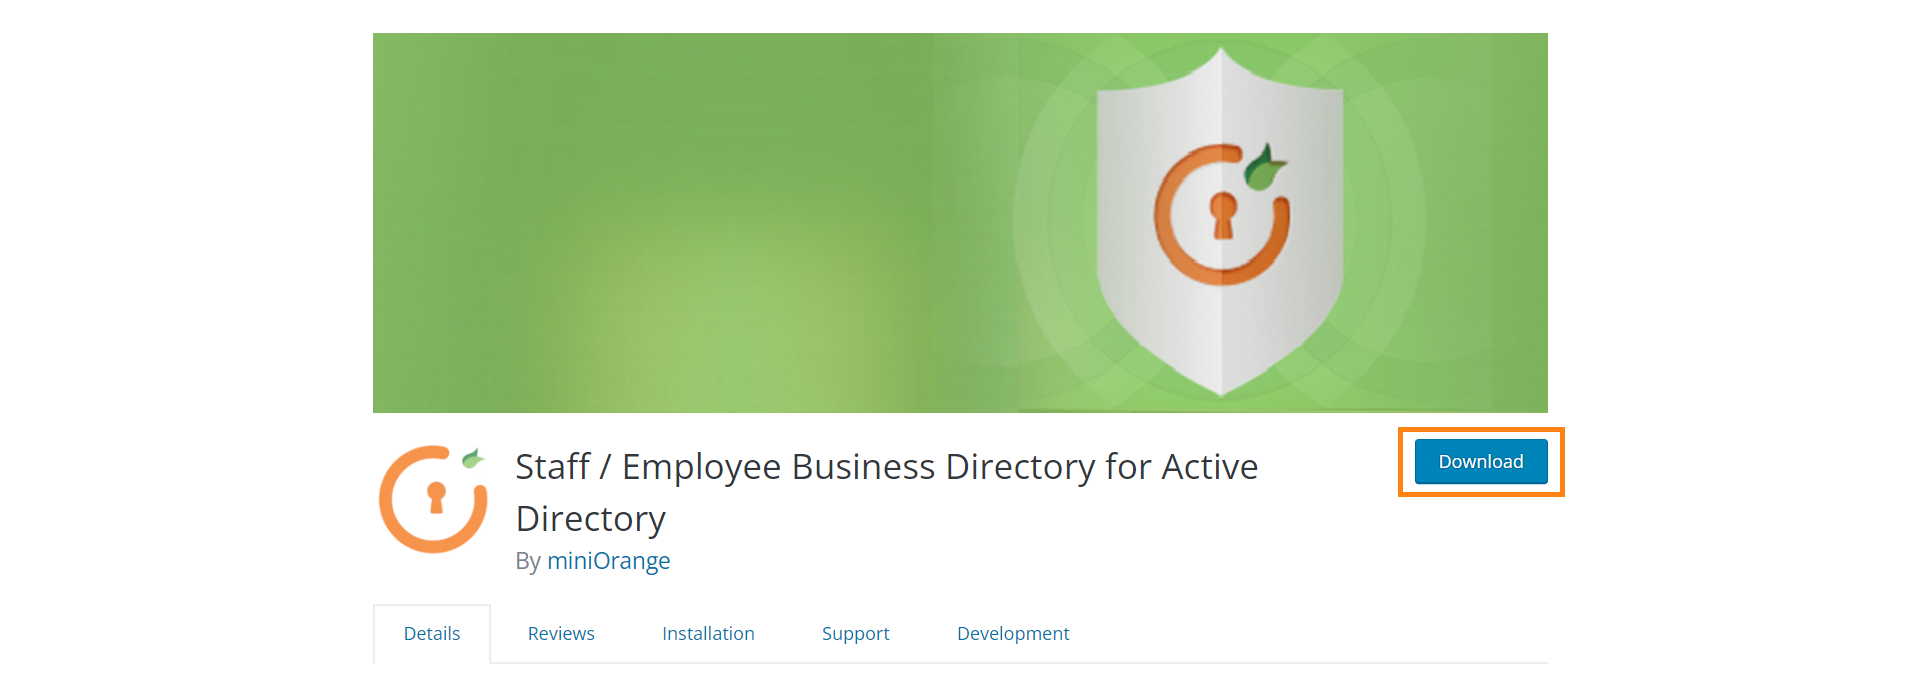 Download miniOrange staff employee business directory for active directory plugin from WordPress